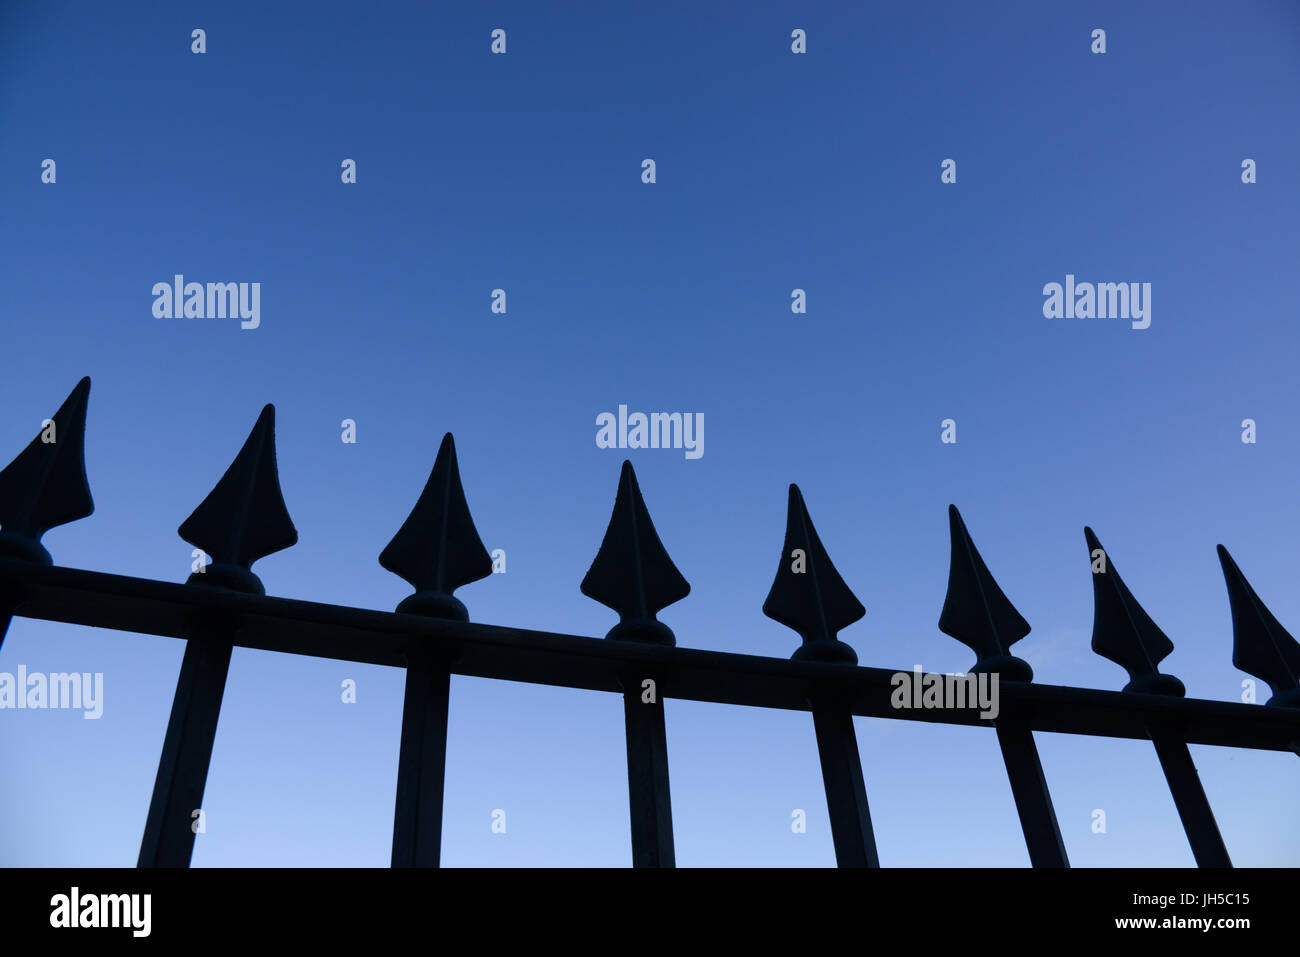 Silhouette view of metal railings against clear blue evening sky. Carmarthenshire. Wales. UK. Stock Photo